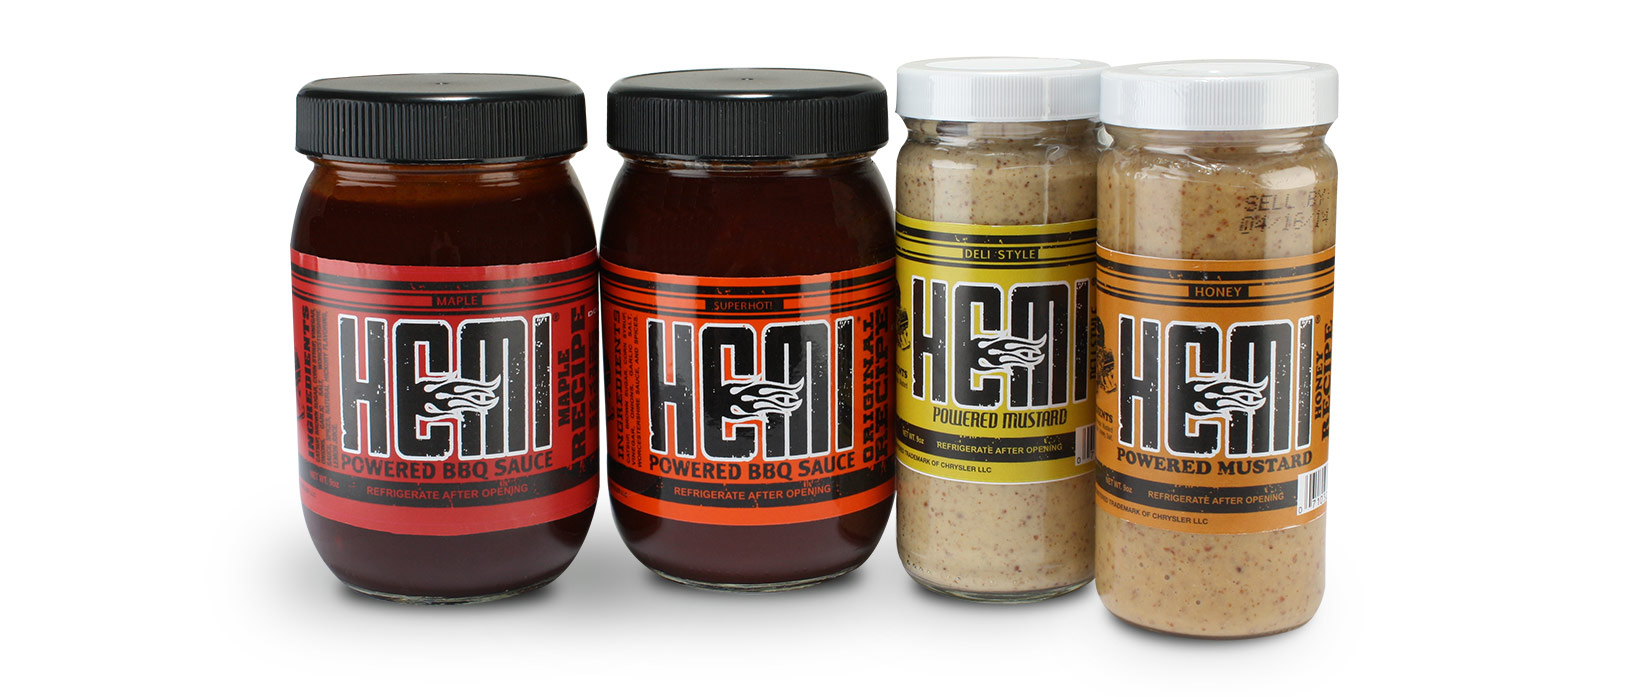 HEMI branded BBQ sauces and mustard sauces